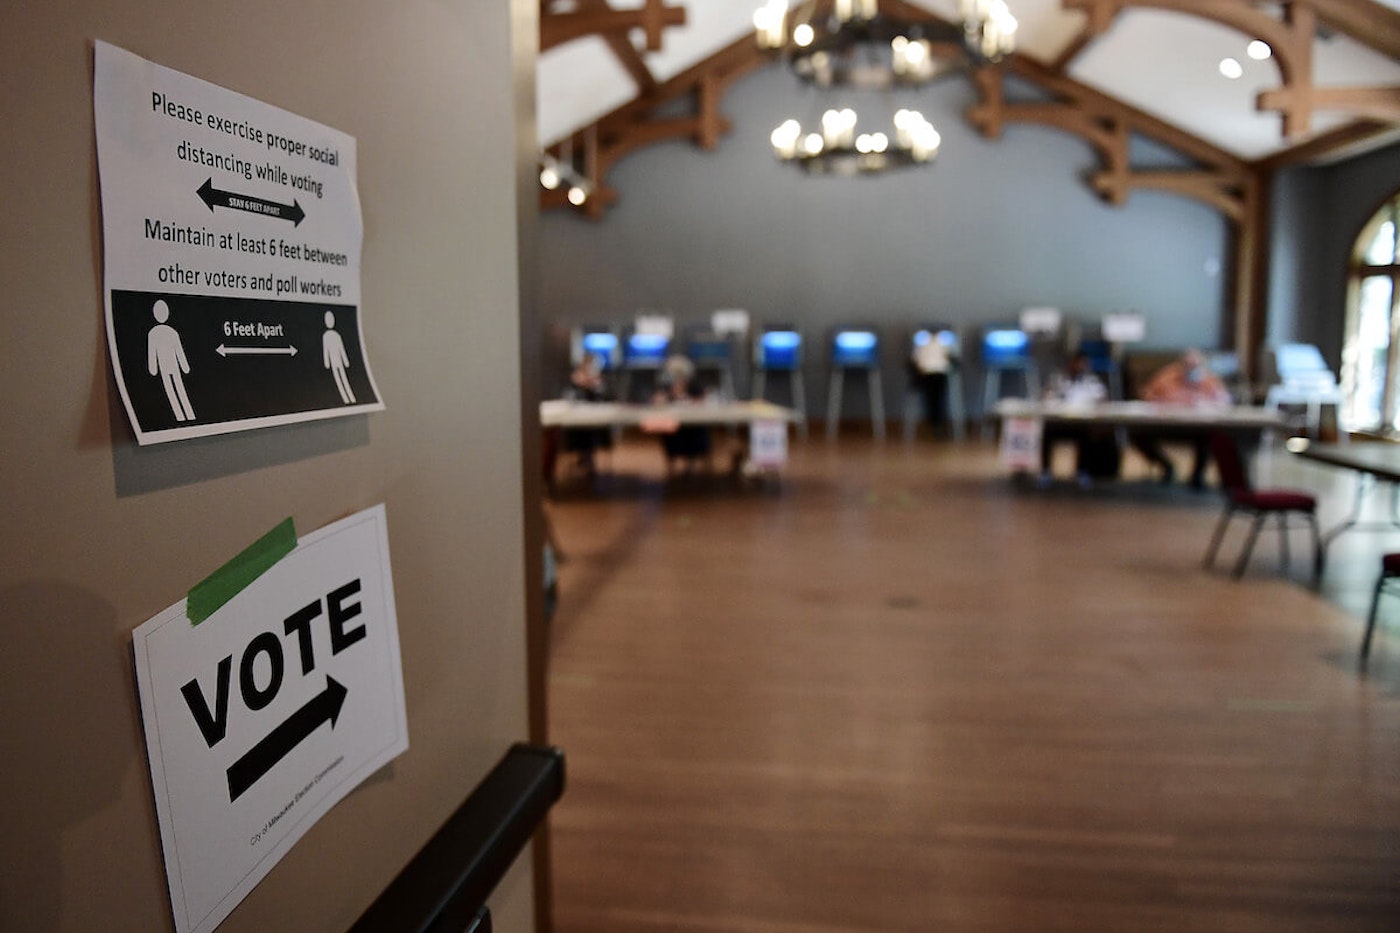 Milwaukee's Charles Allis Art Museum served as a polling station on Aug. 11. (Photo by Stacy Revere/Getty Images)